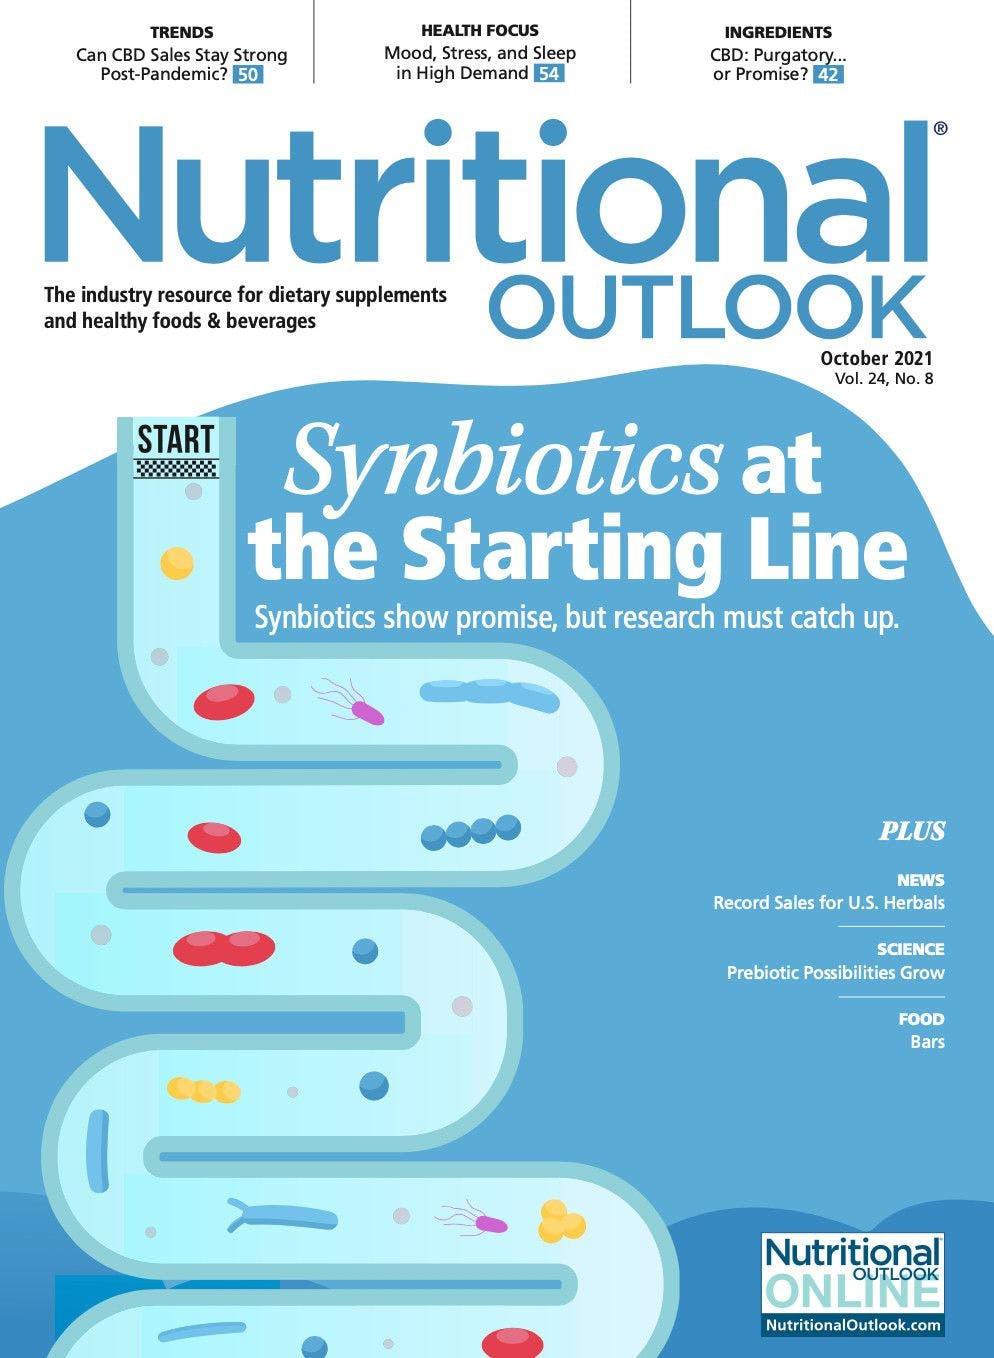 Nutritional Outlook Vol. 24 No. 8